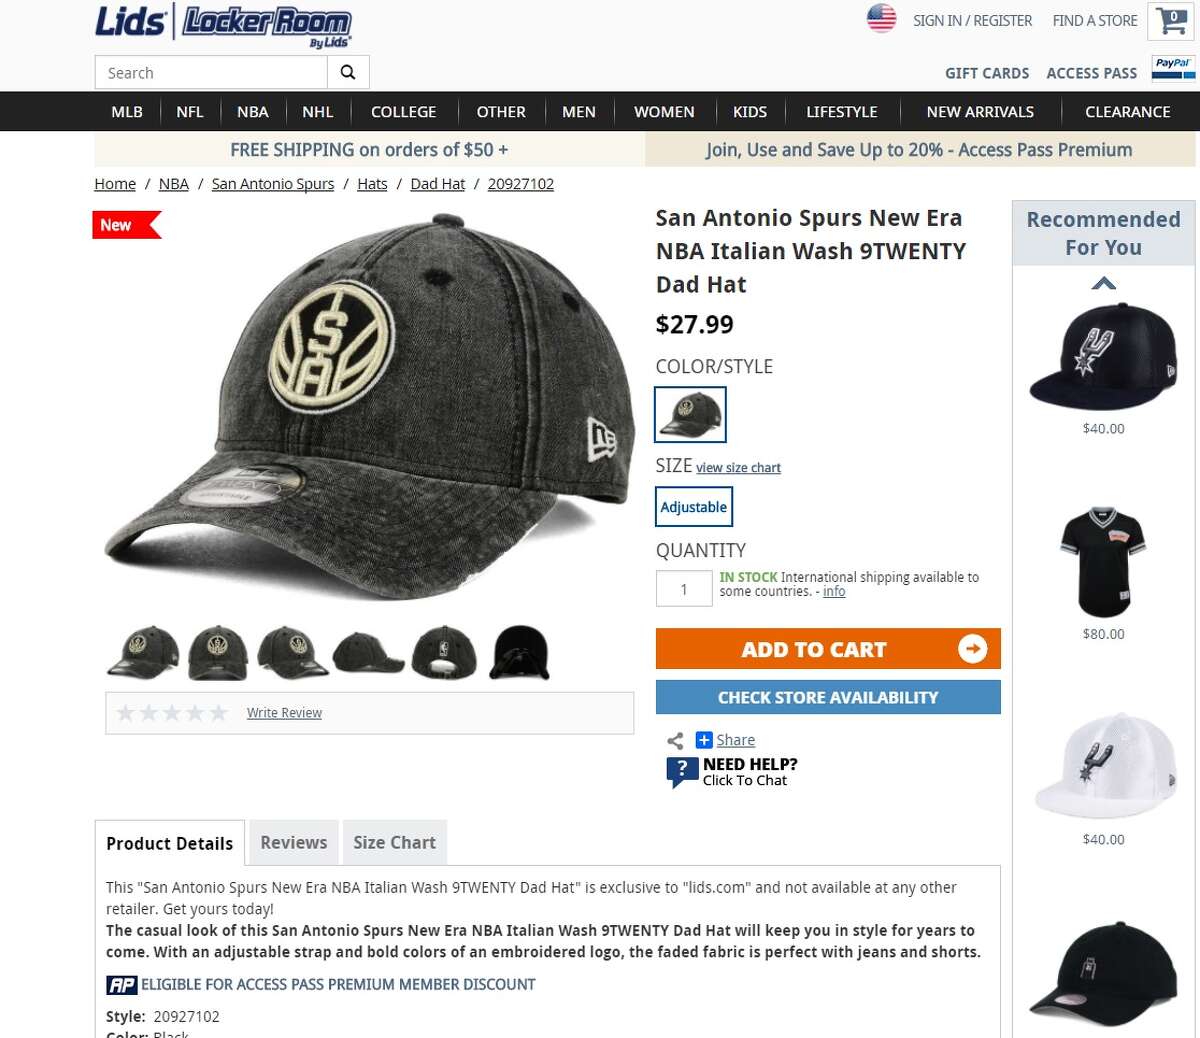 Despite an uproar from disapproving fans, the Spurs released their new logo on something called a "dad hat" sold by Lids. The $27.99 9TWENTY Dad Hat is listed on the online shop, showing the "New Era" insignia that many diehards were angered by a few weeks ago.